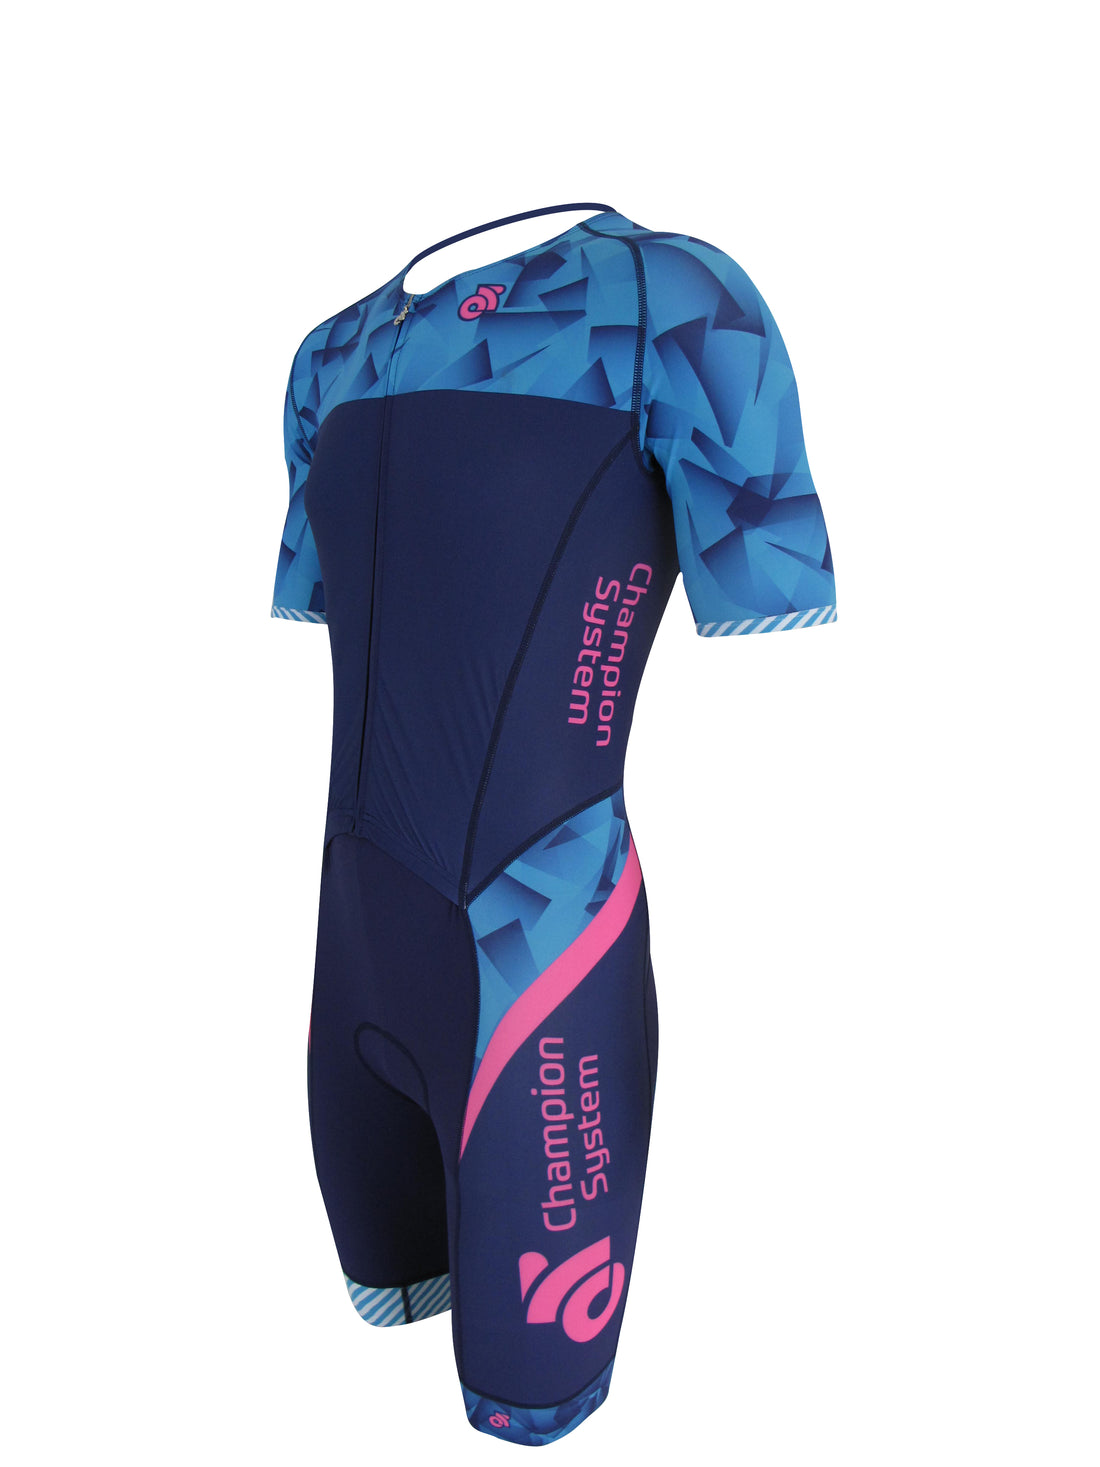 Champion System Performance Aero Tri Suit Side View